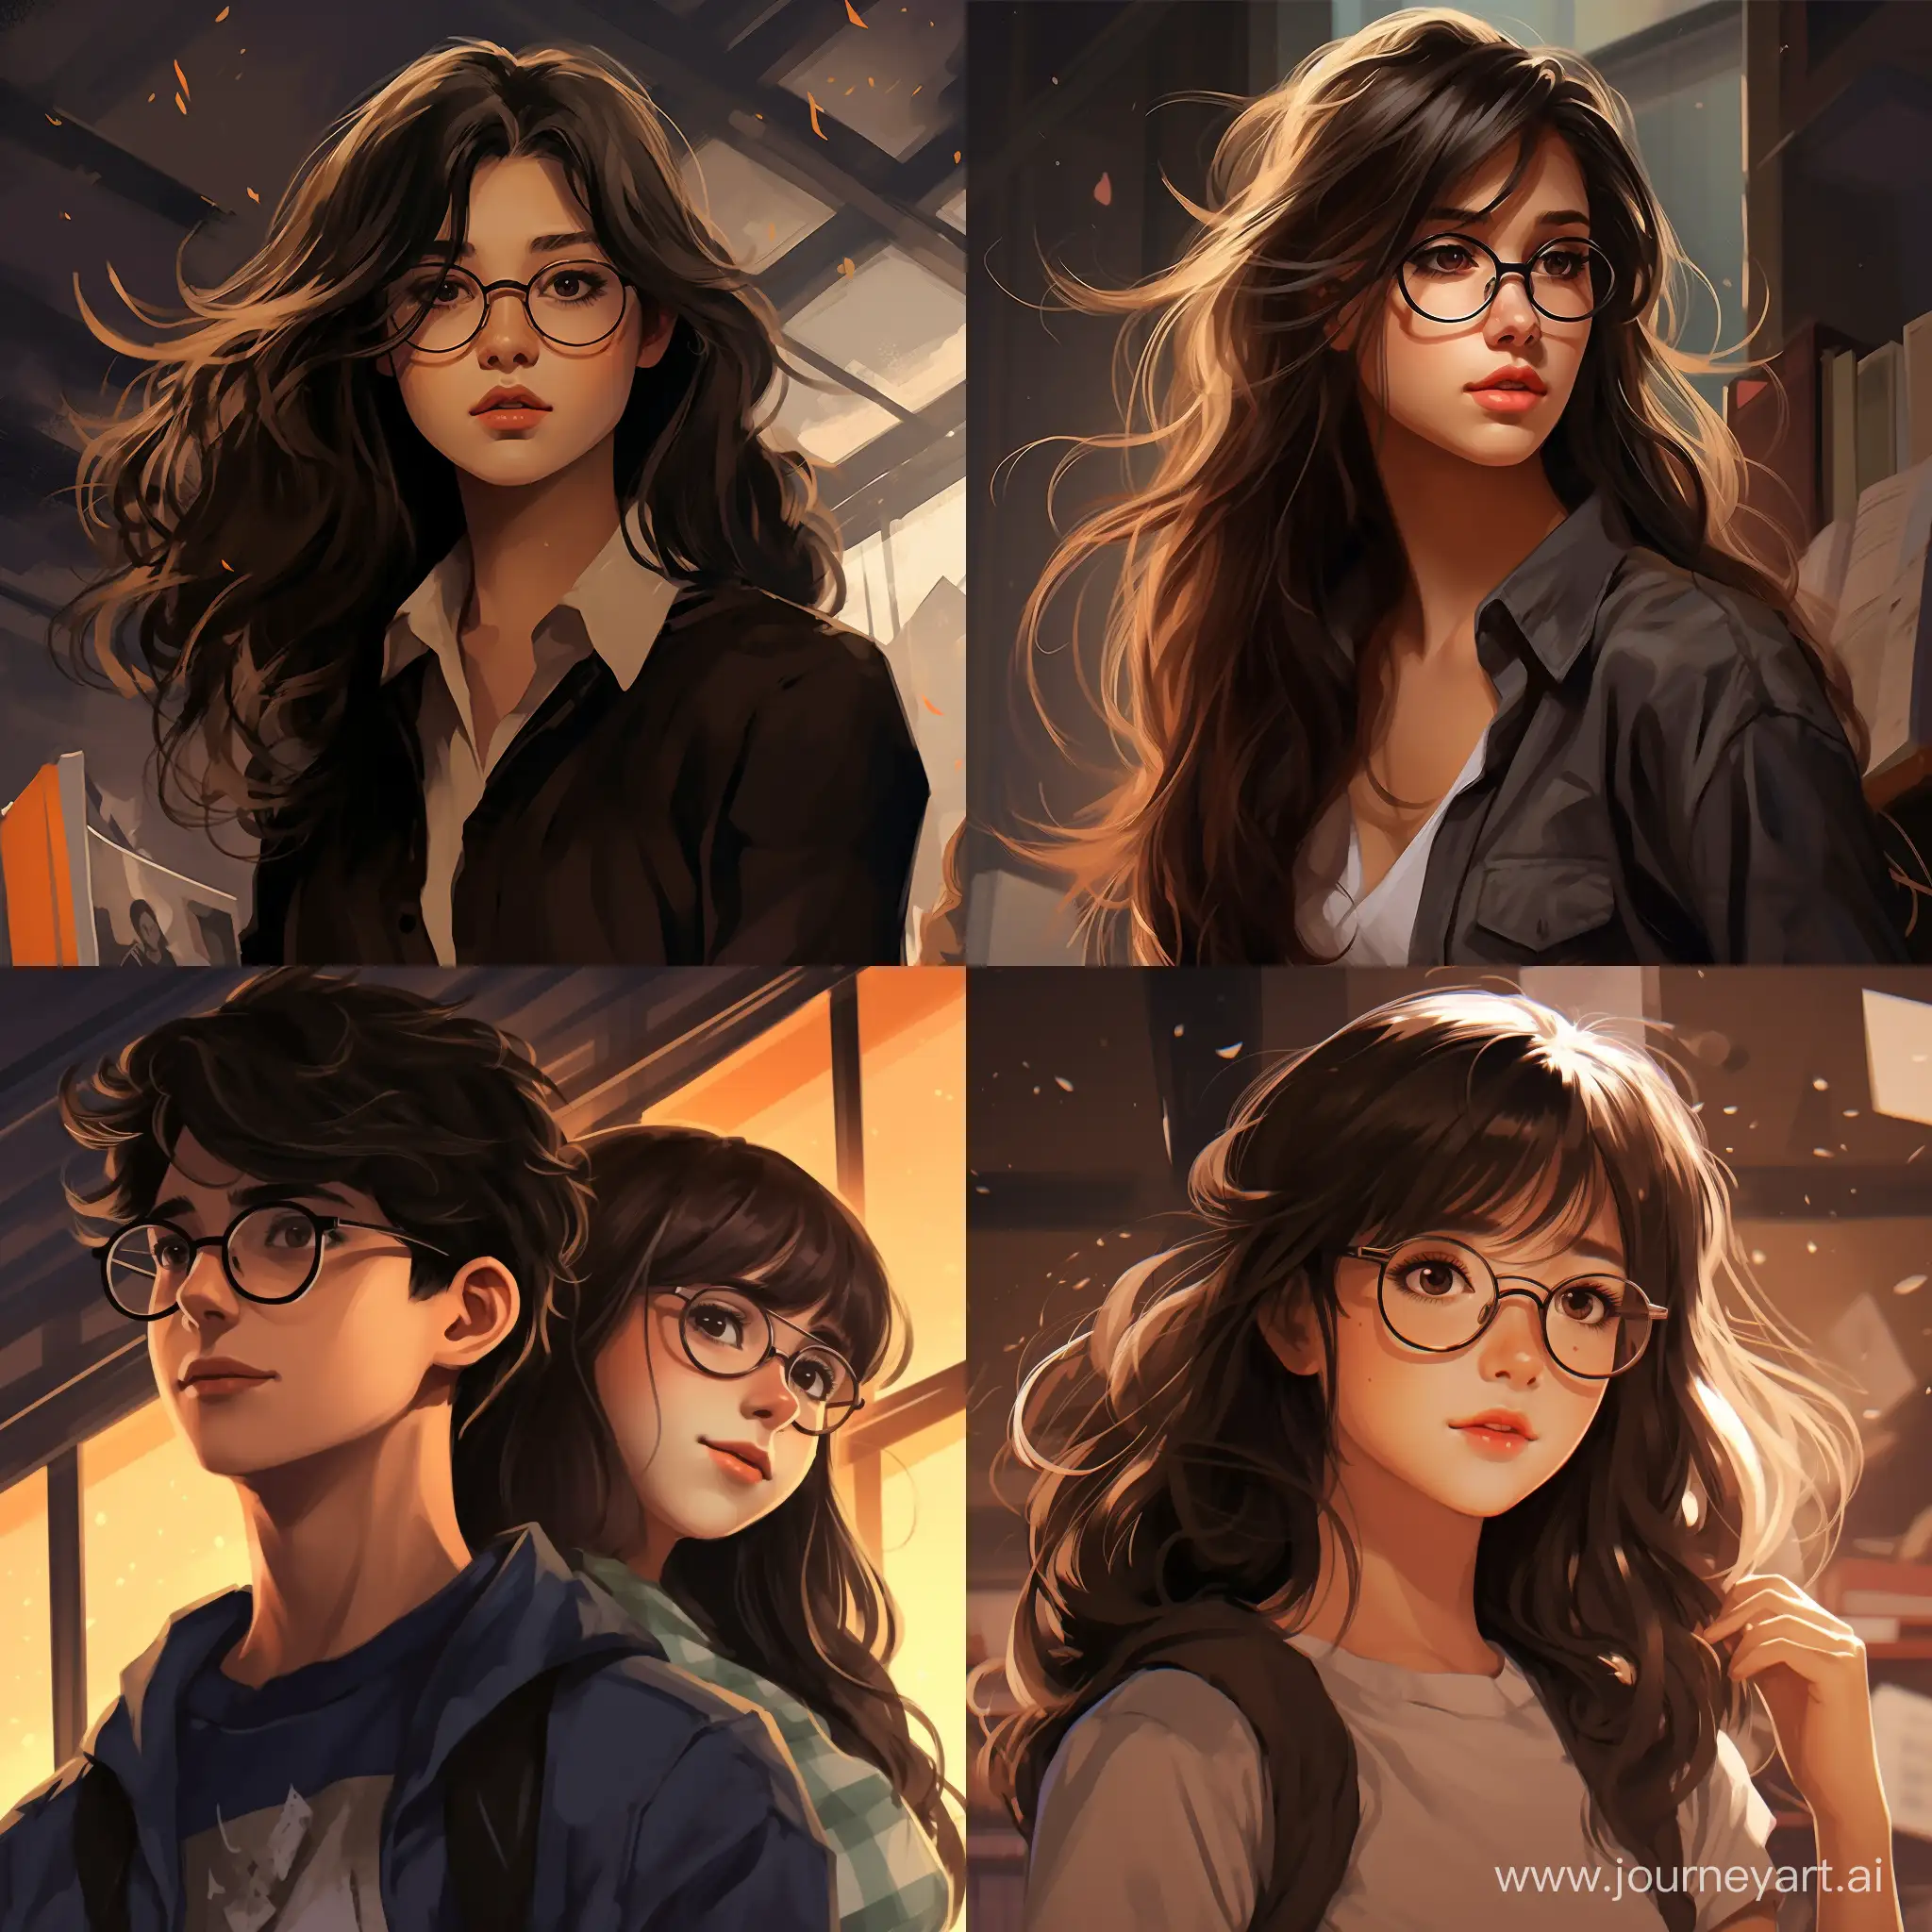 A pretty and popular girl with long brown hair, glasses, short stature, bangs, finally gets to the high school of her dreams and collides with the tall, dark-haired, glasses-wearing, handsome, popular bad boy of the school